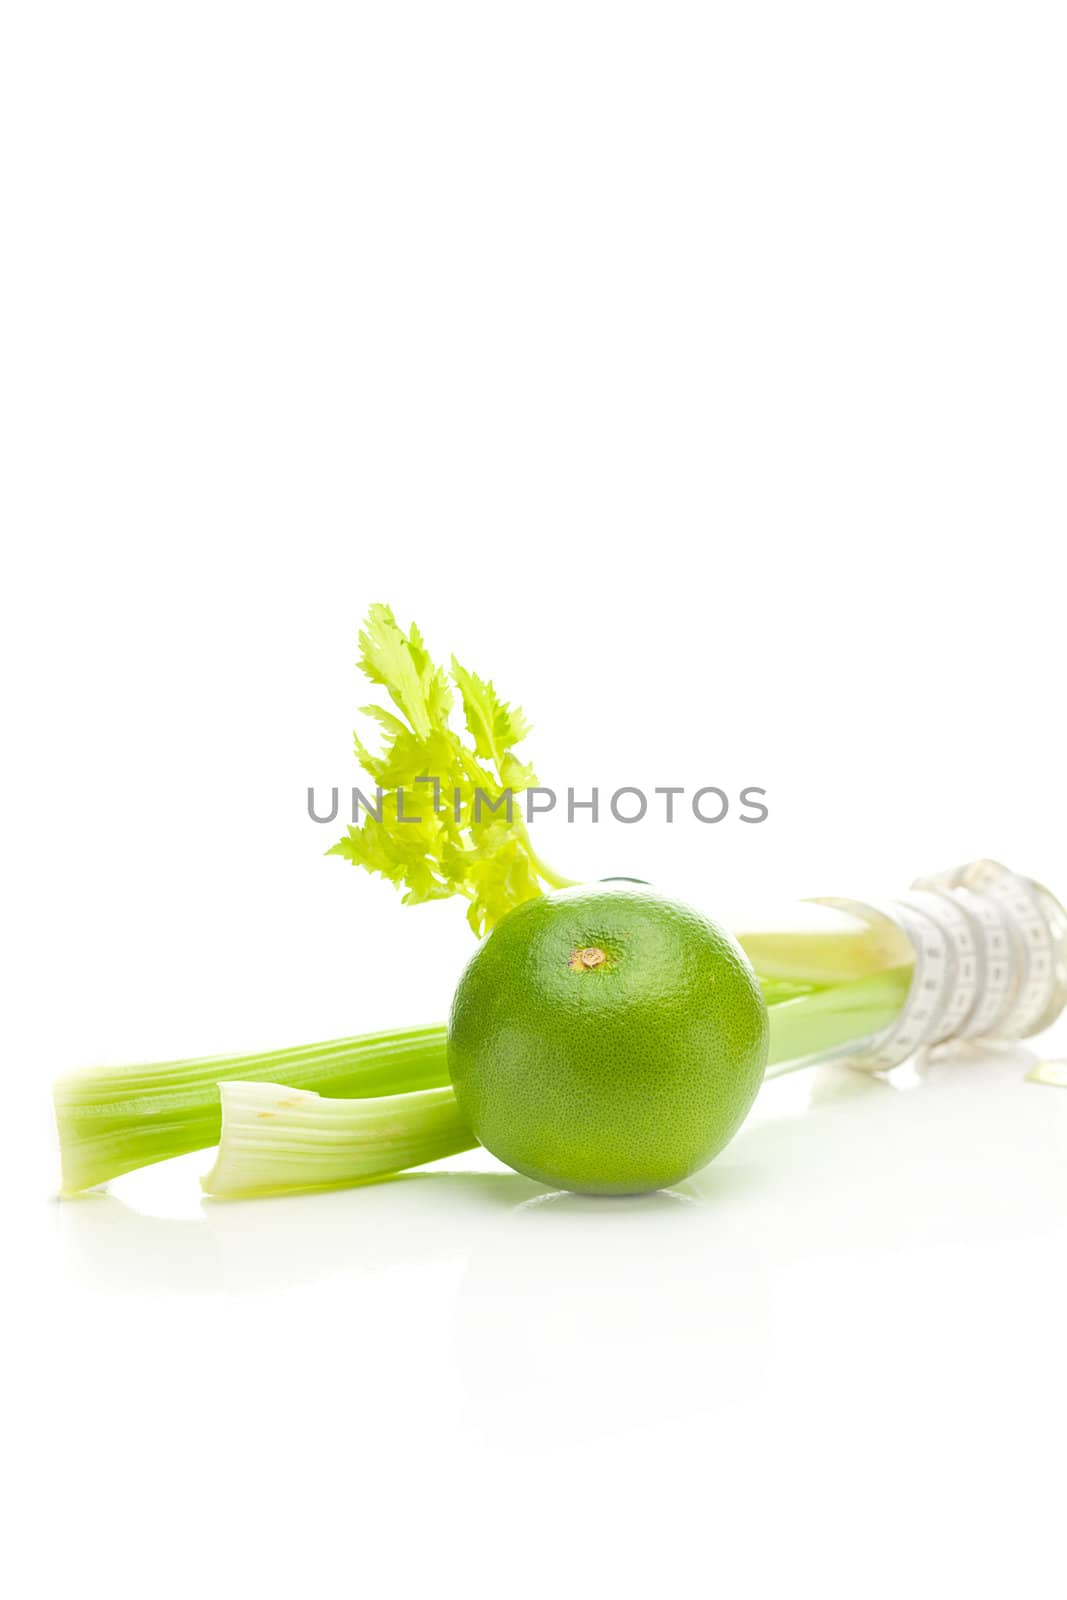 celery in a tall glass, green grapefruit and measure tape isolated on white